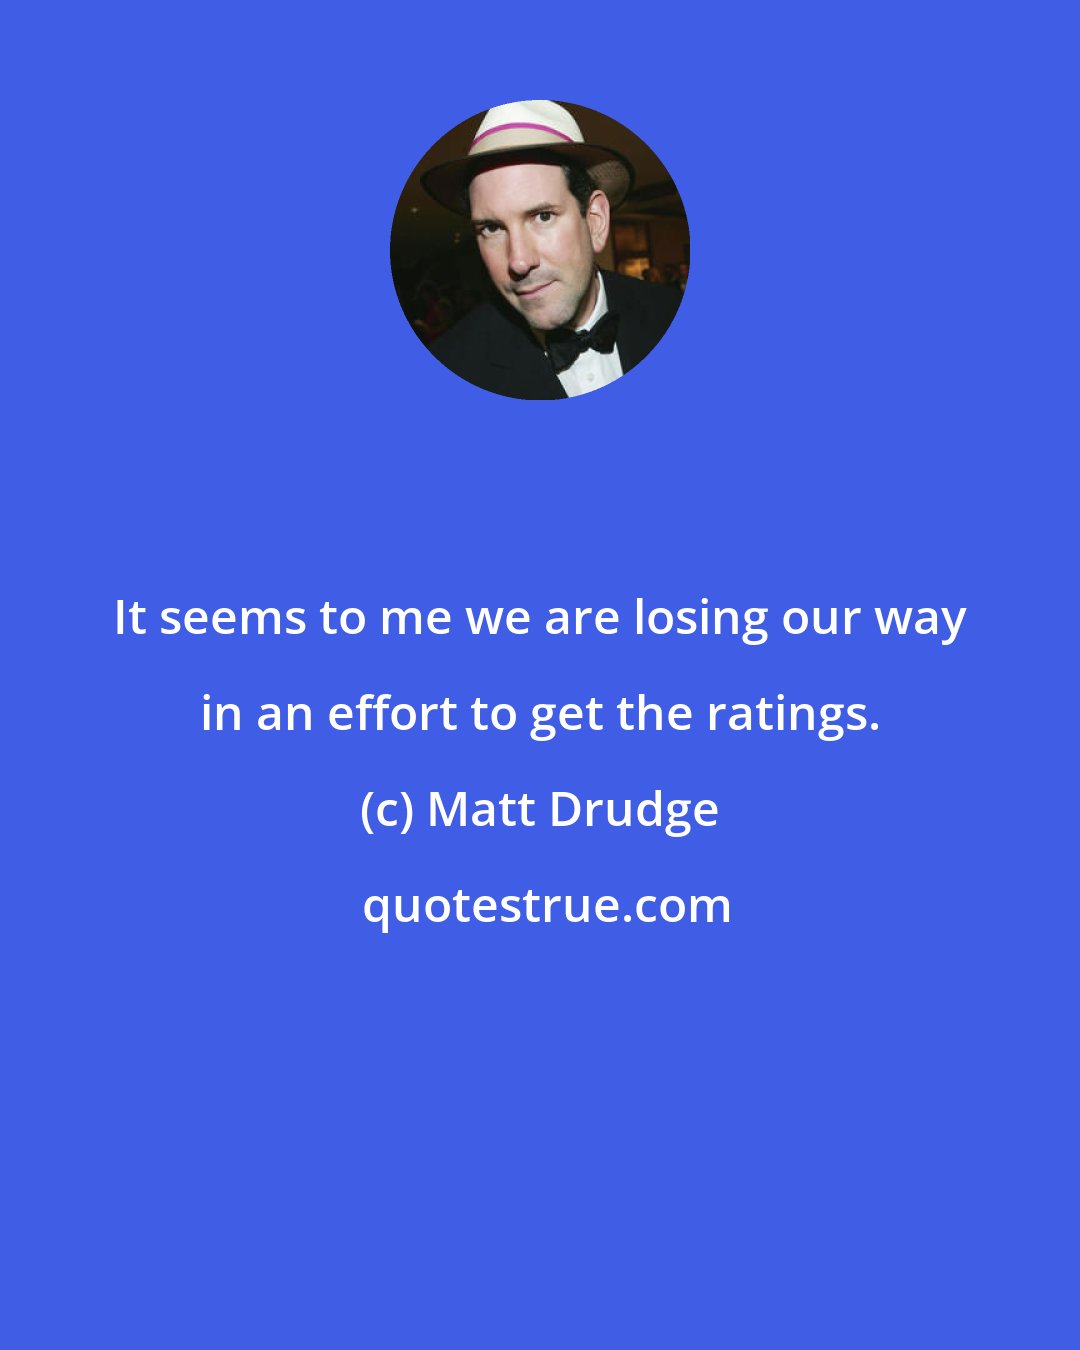 Matt Drudge: It seems to me we are losing our way in an effort to get the ratings.